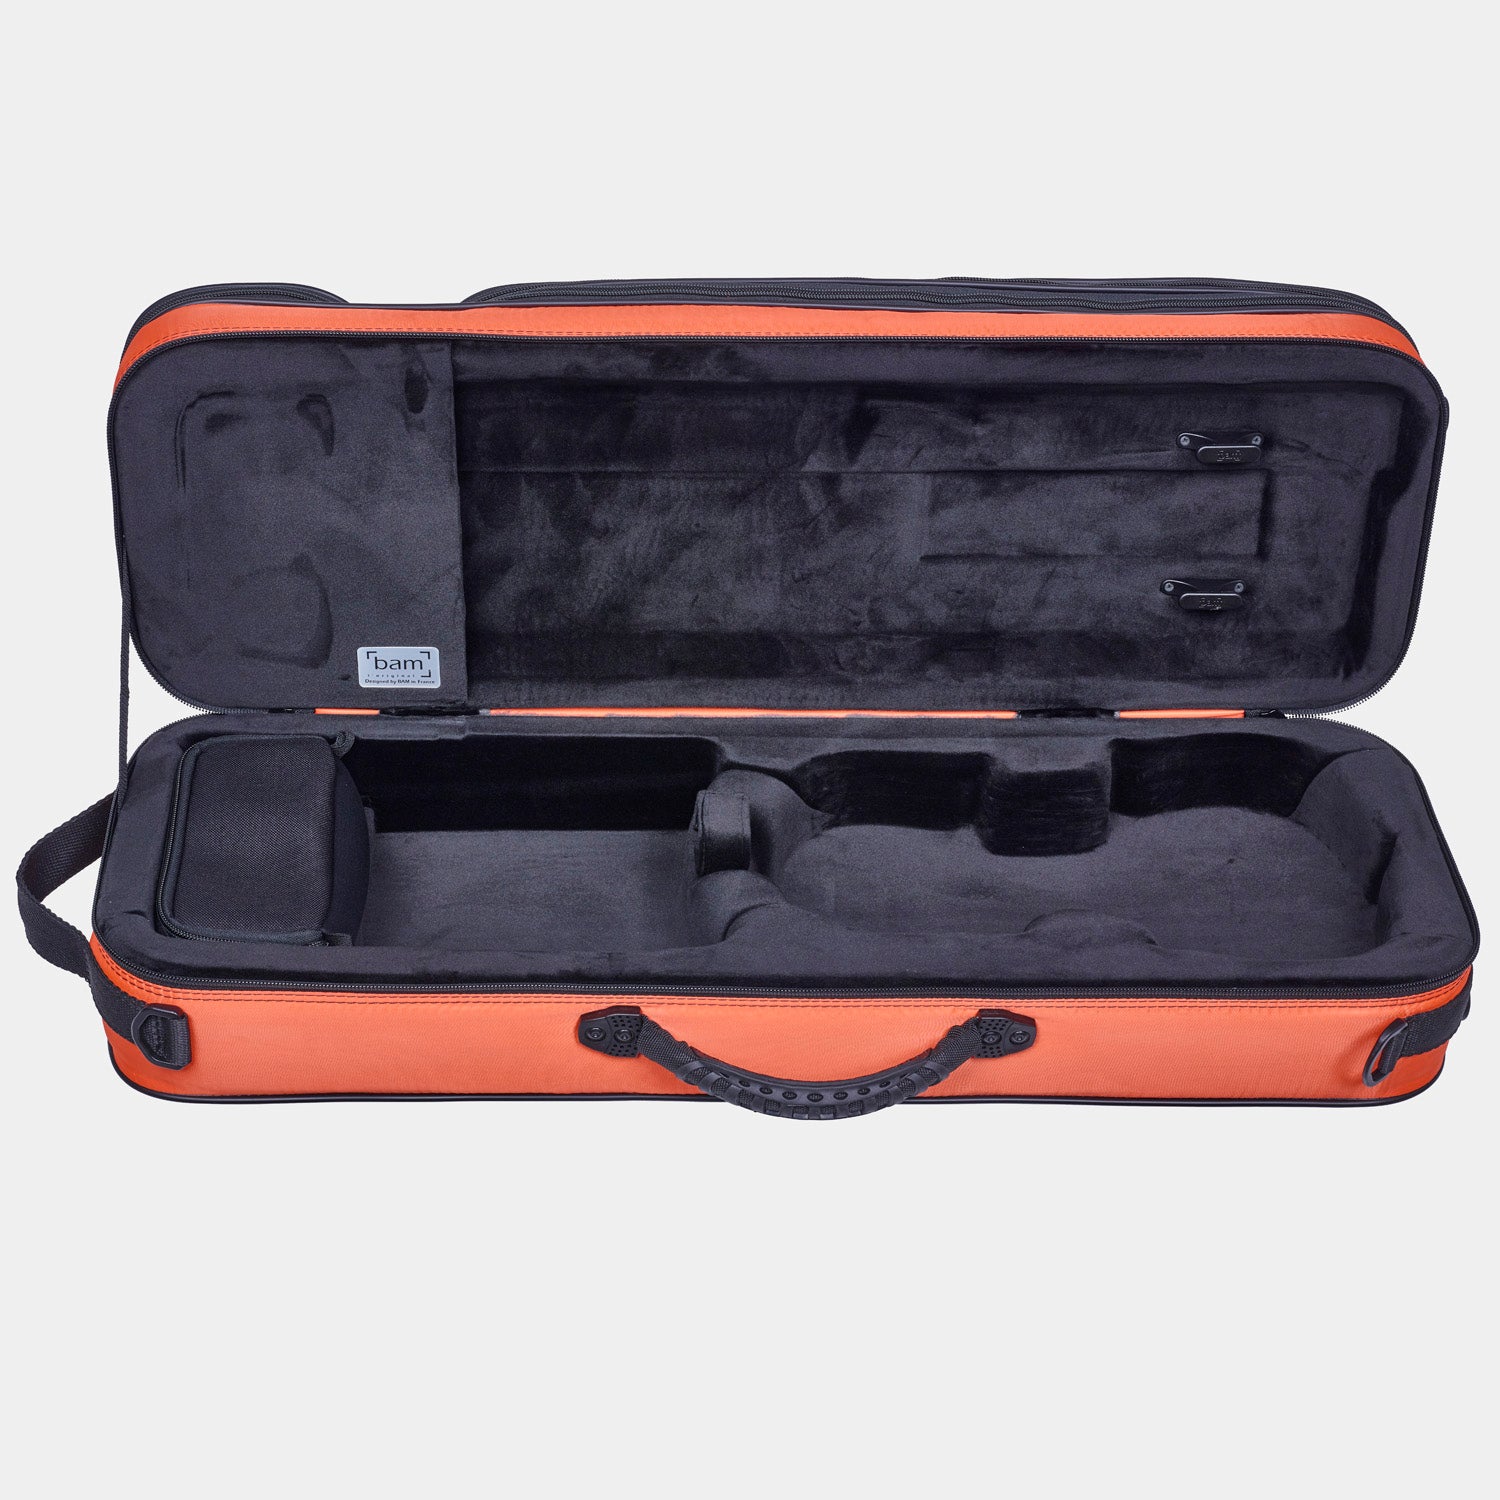 Youngster Violin Case